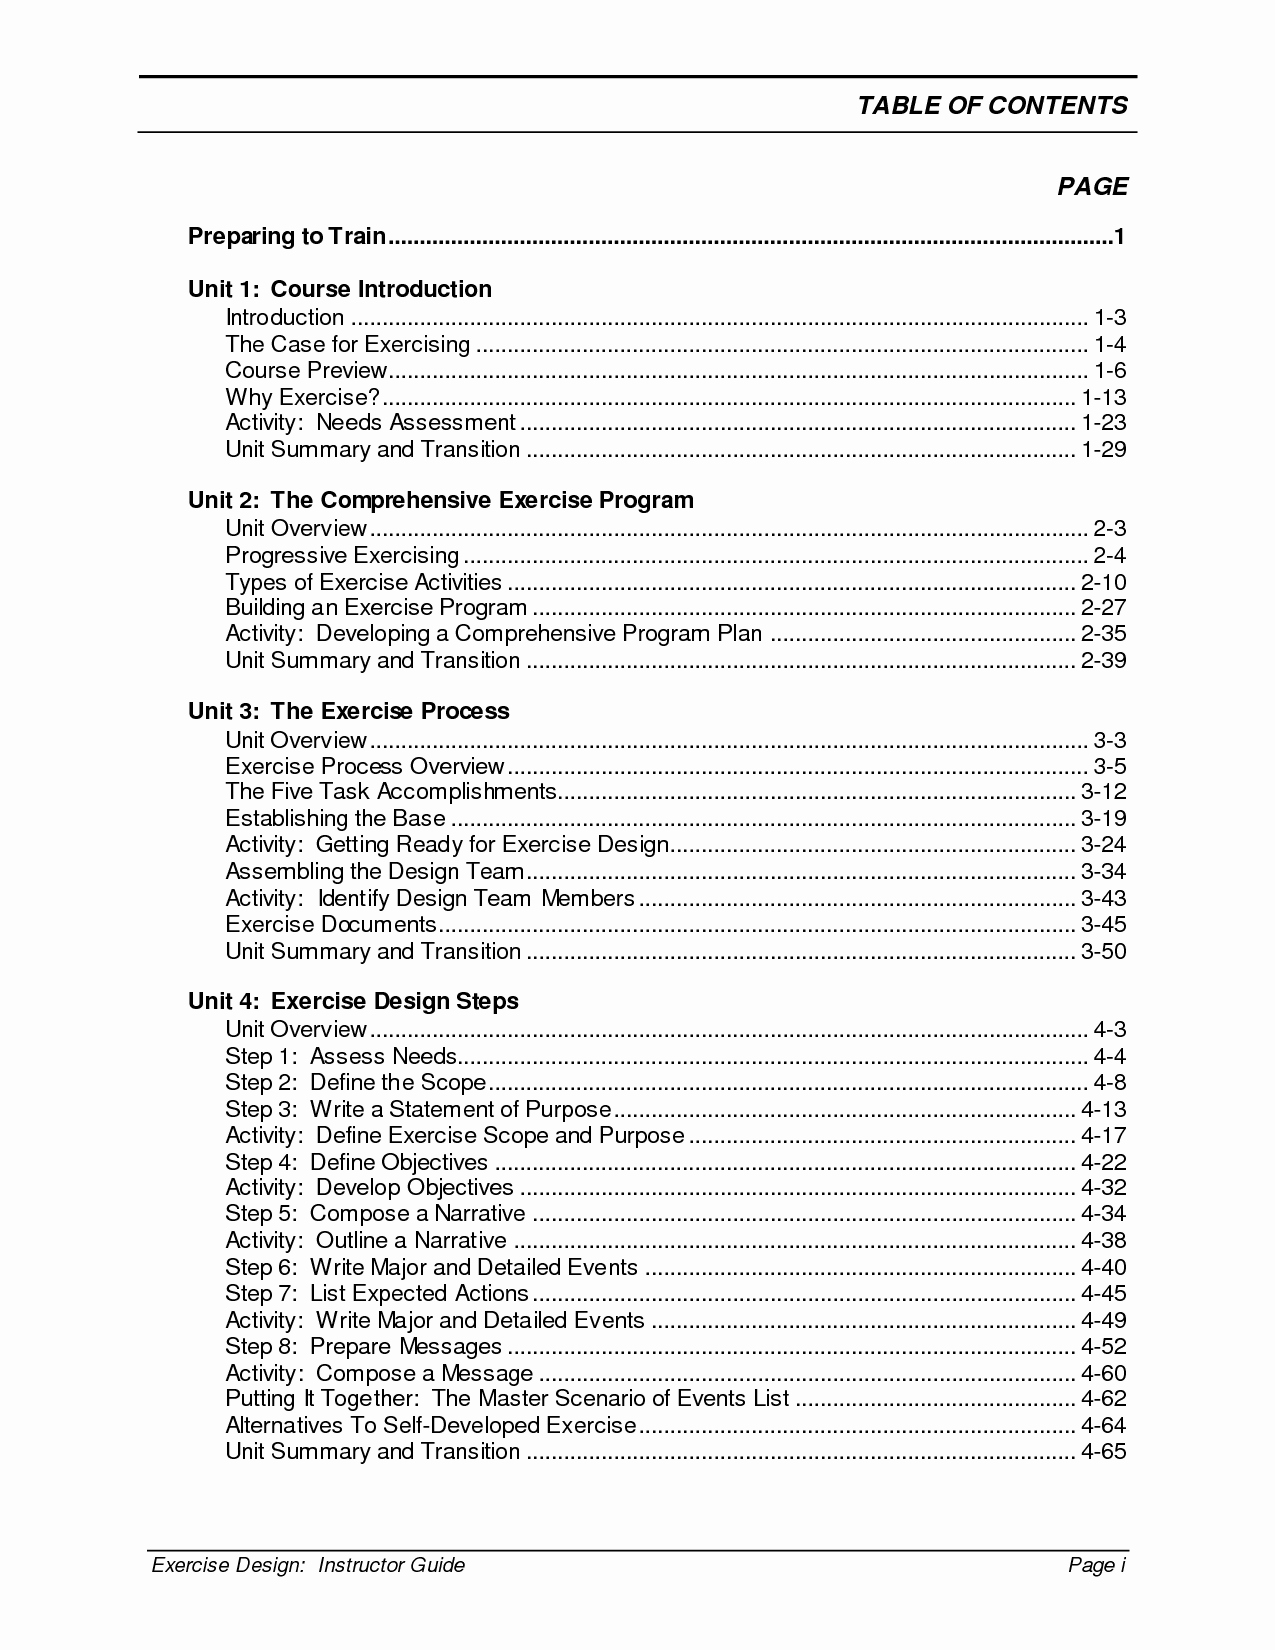 Table Of Contents Template Lovely Table Contents Template